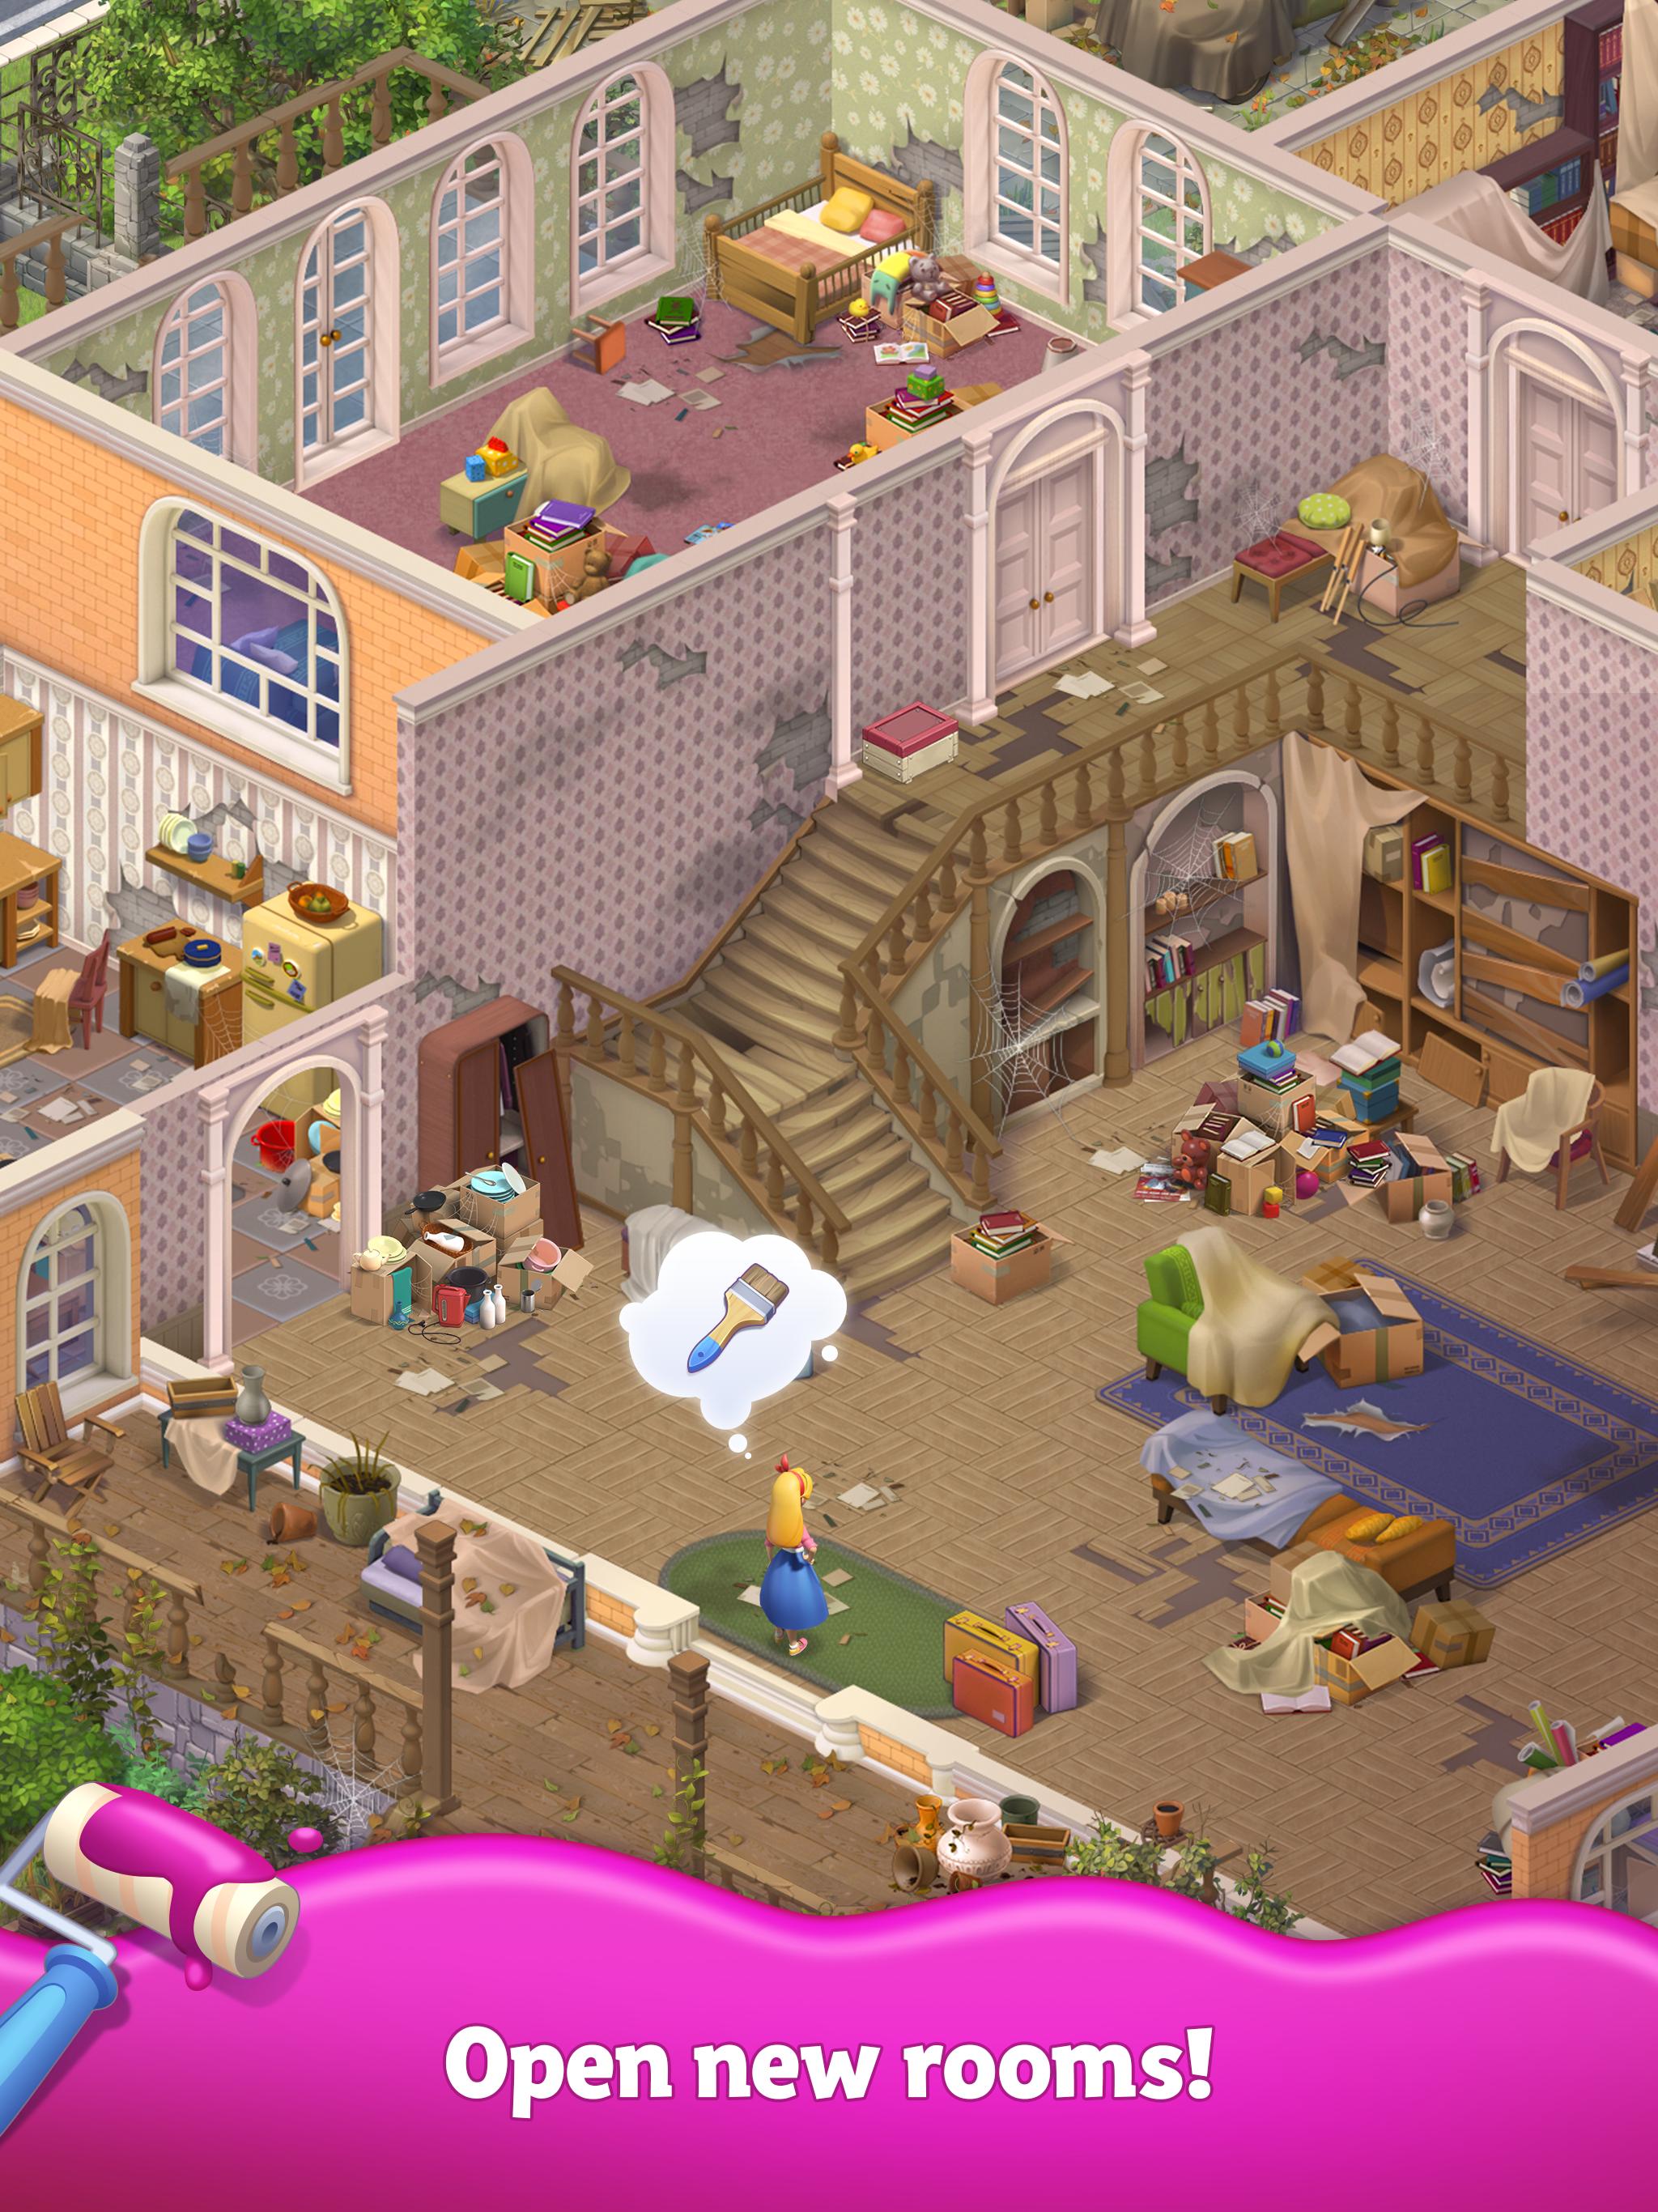 Merge Matters Home renovation game with a twist 8.8.03 Screenshot 12